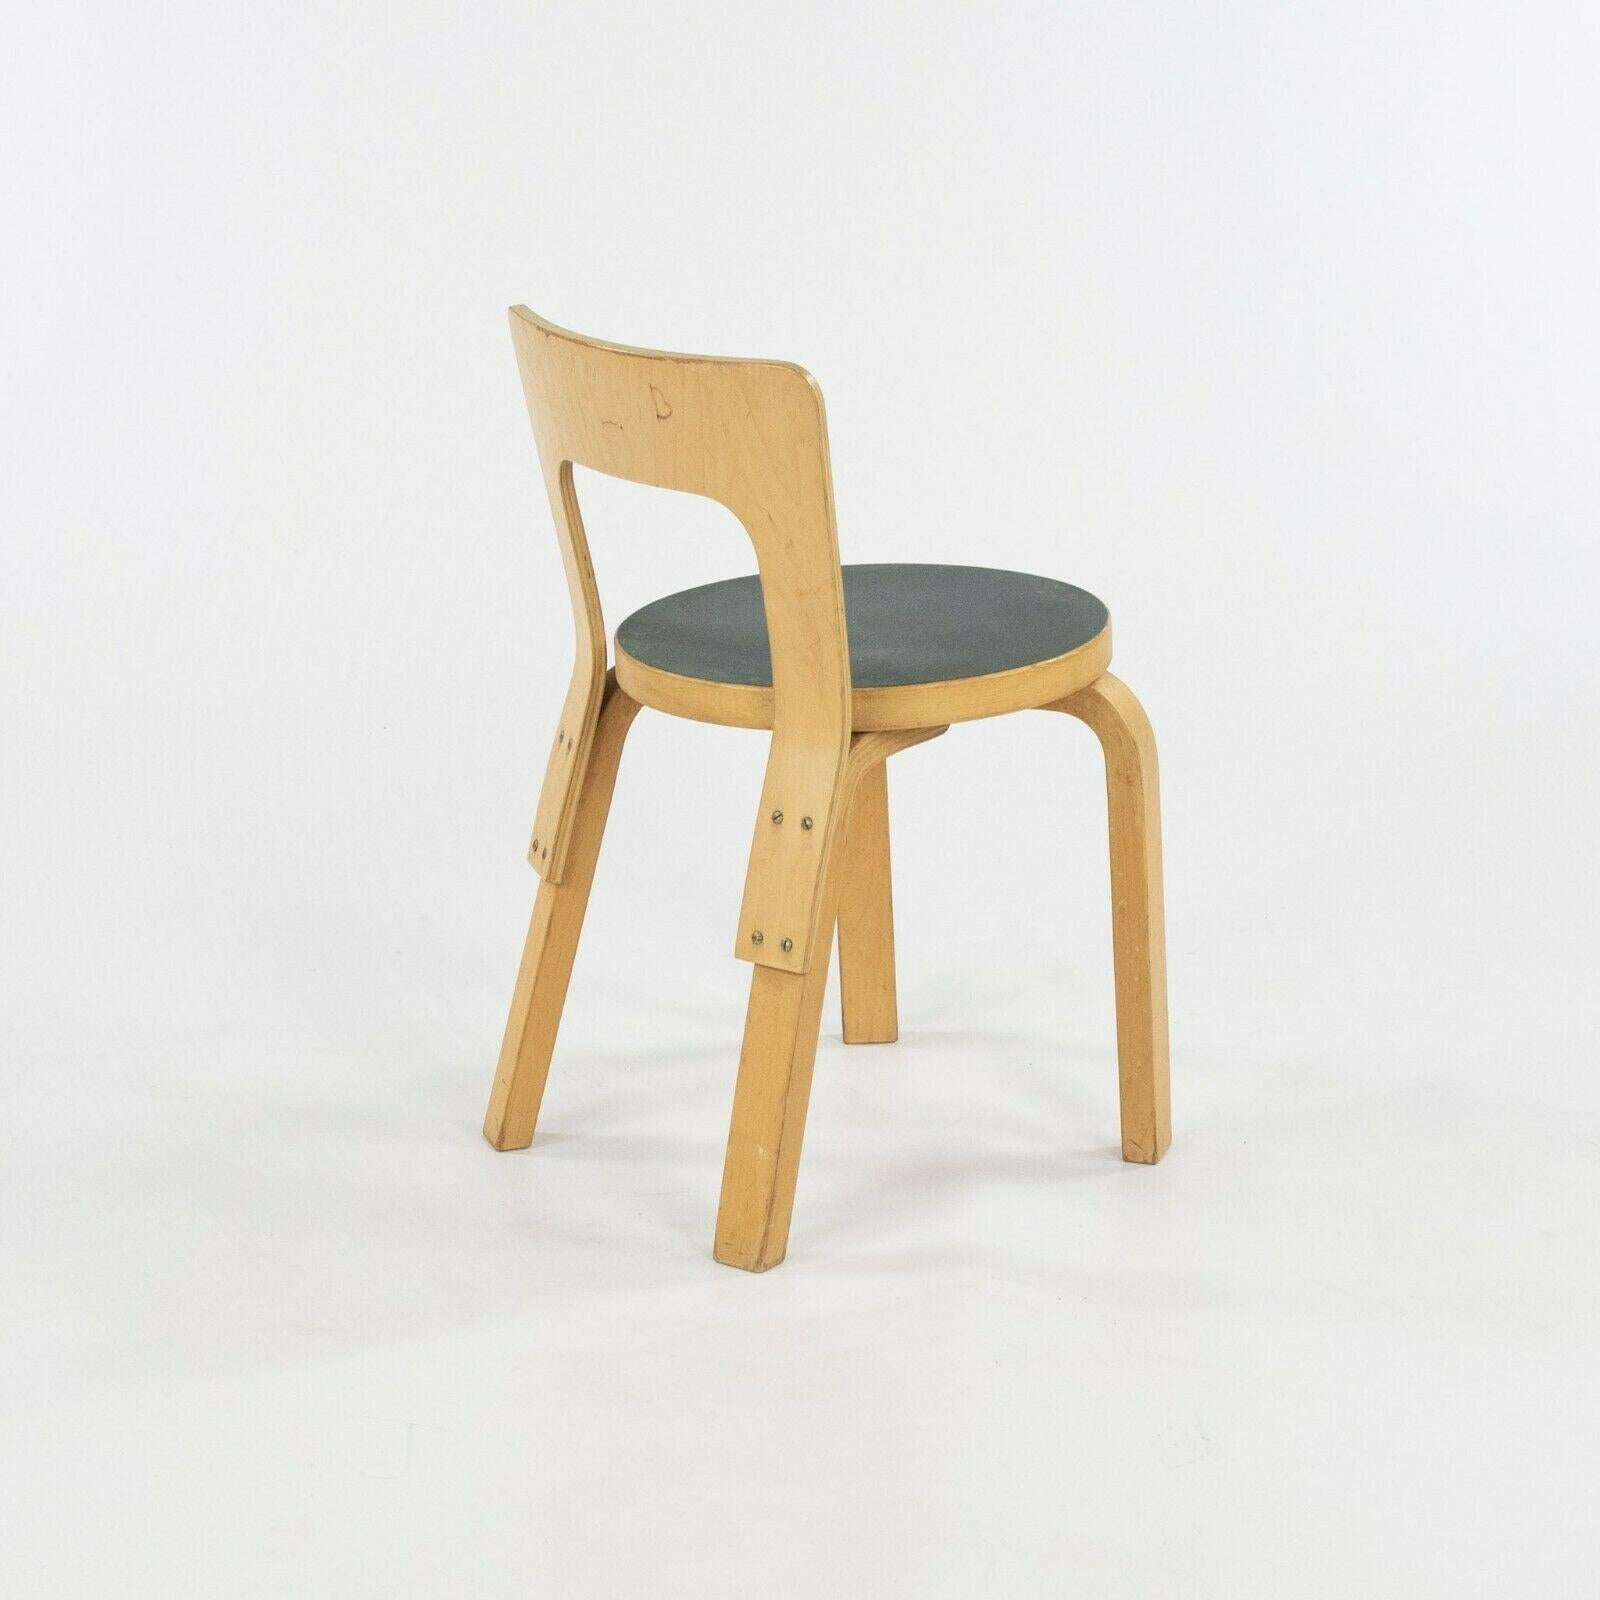 Listed for sale is a pair of circa 1950s N65 childs chairs designed by Alvar and Aino Aalto, produced by Artek in Finland. These chairs were ordered with blue/green laminate seats and birch plywood construction. They are vintage examples with signs